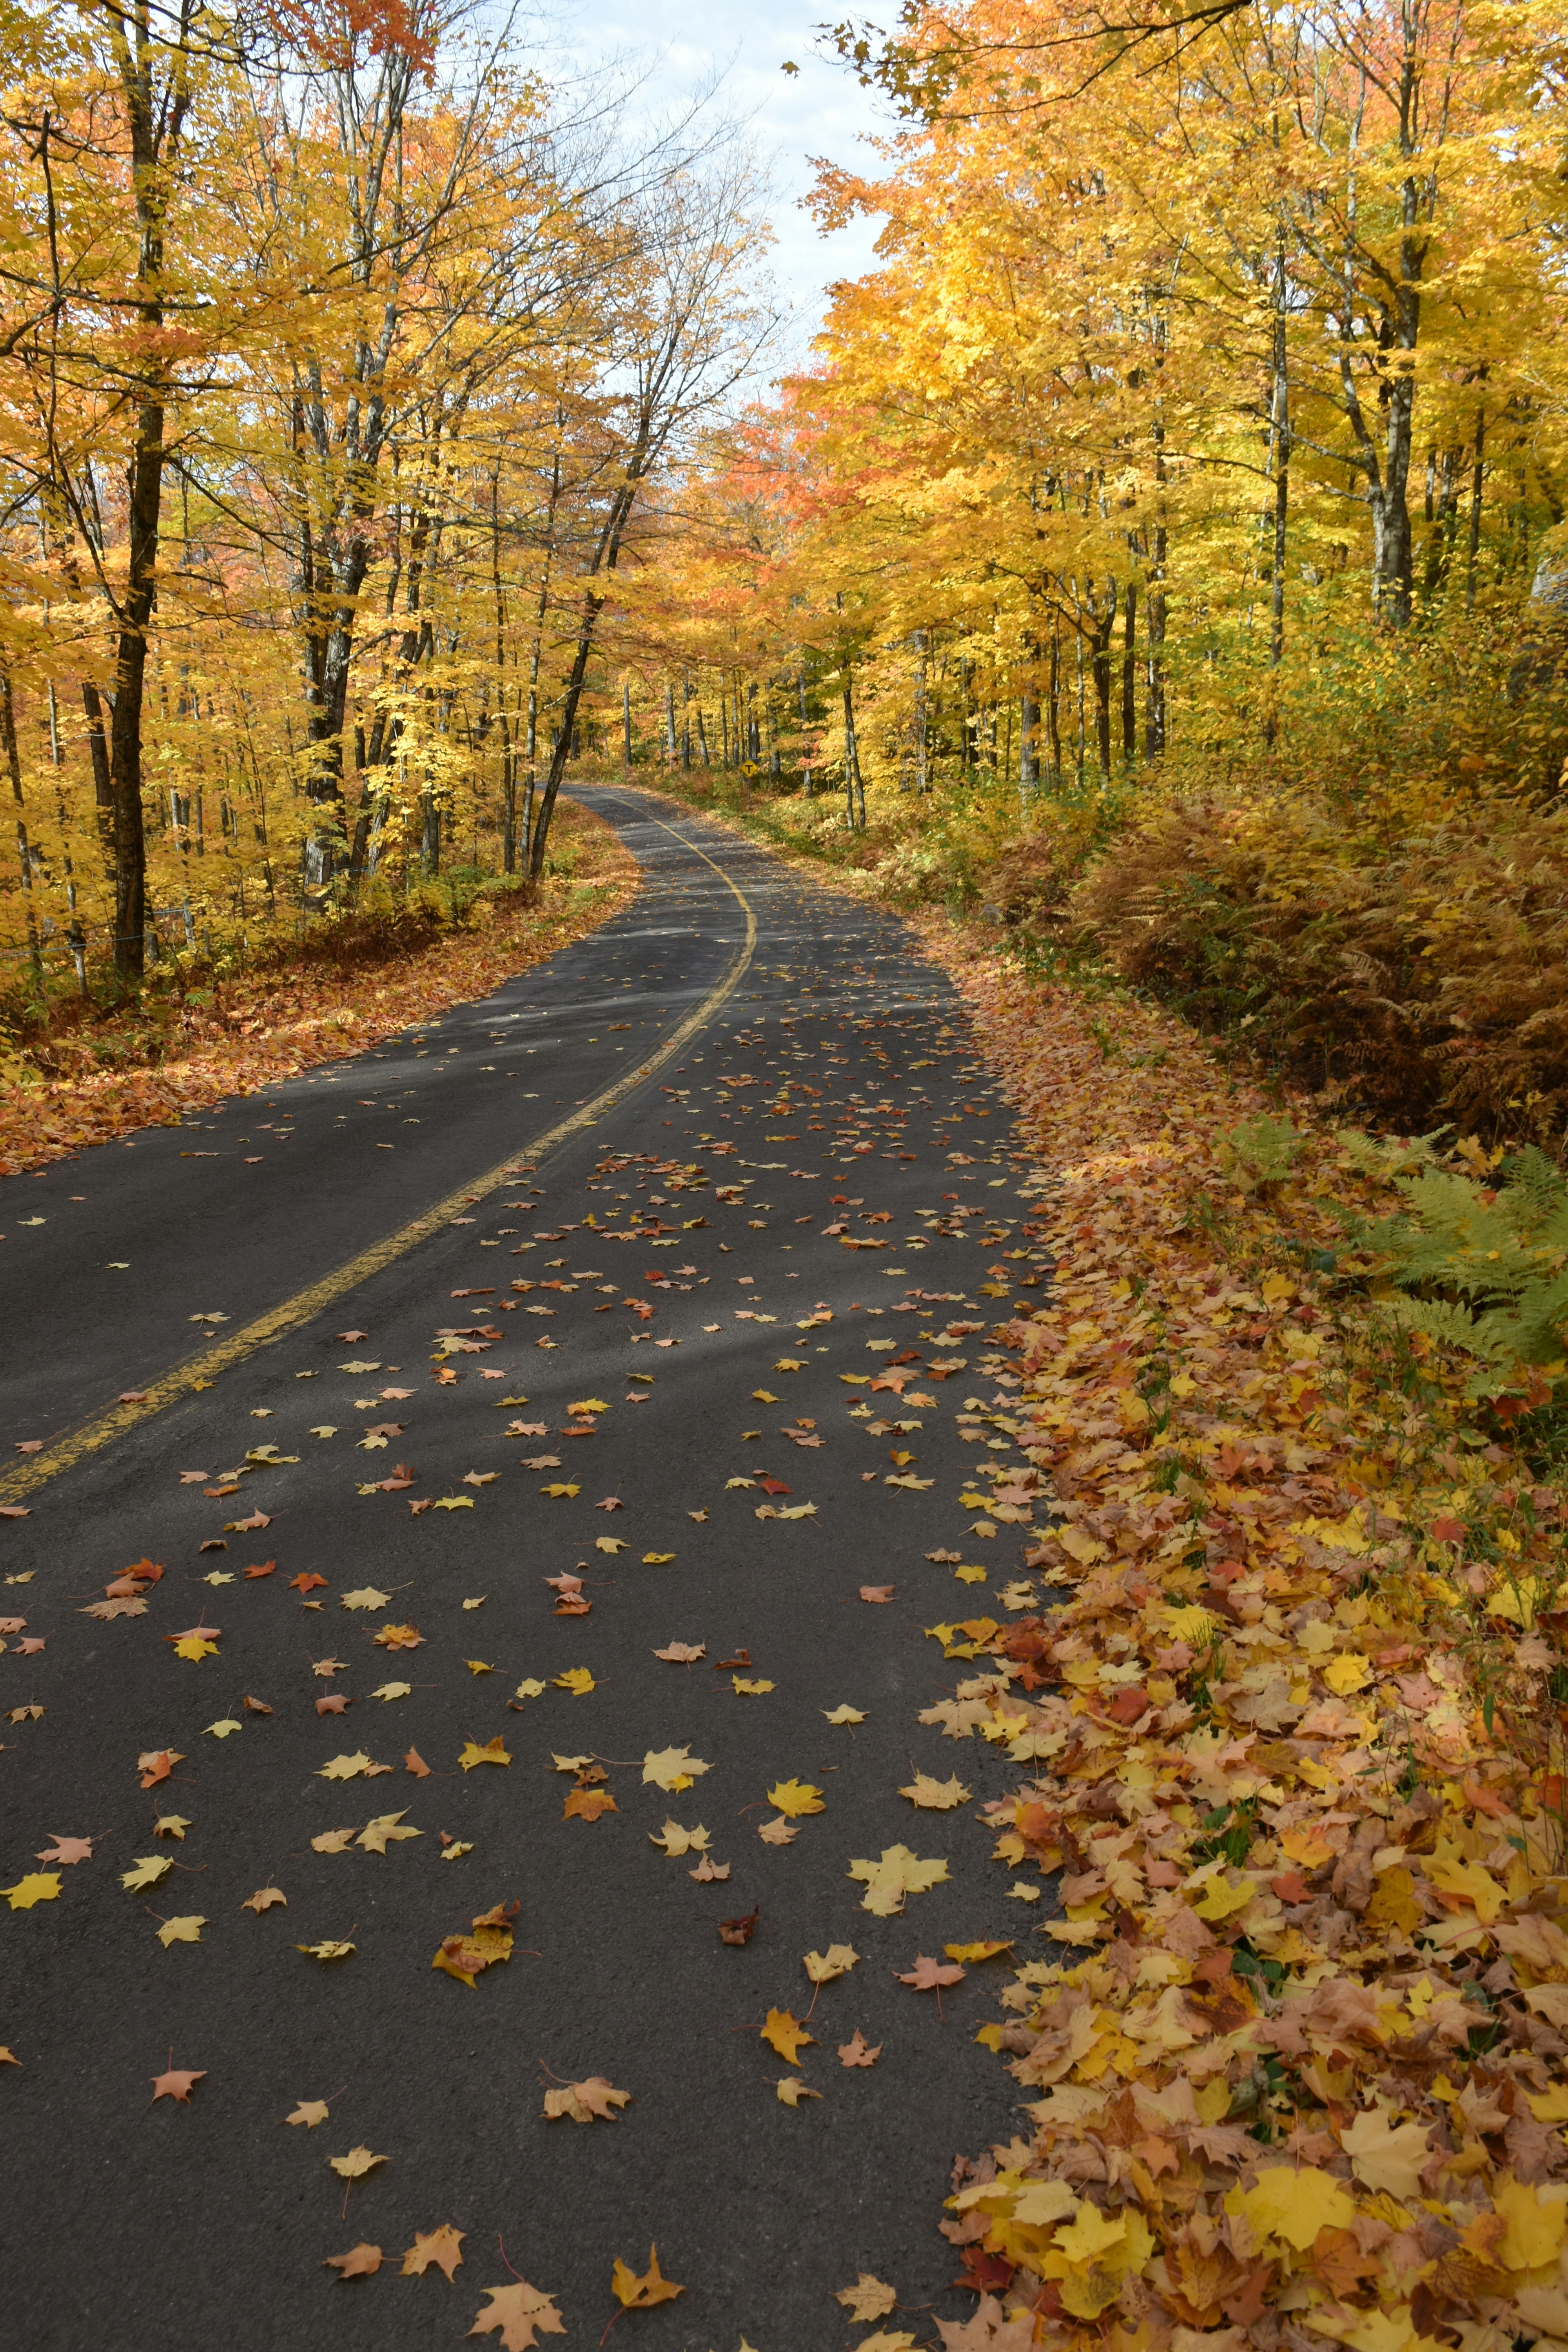 A country road in autumn, Québec, Canada